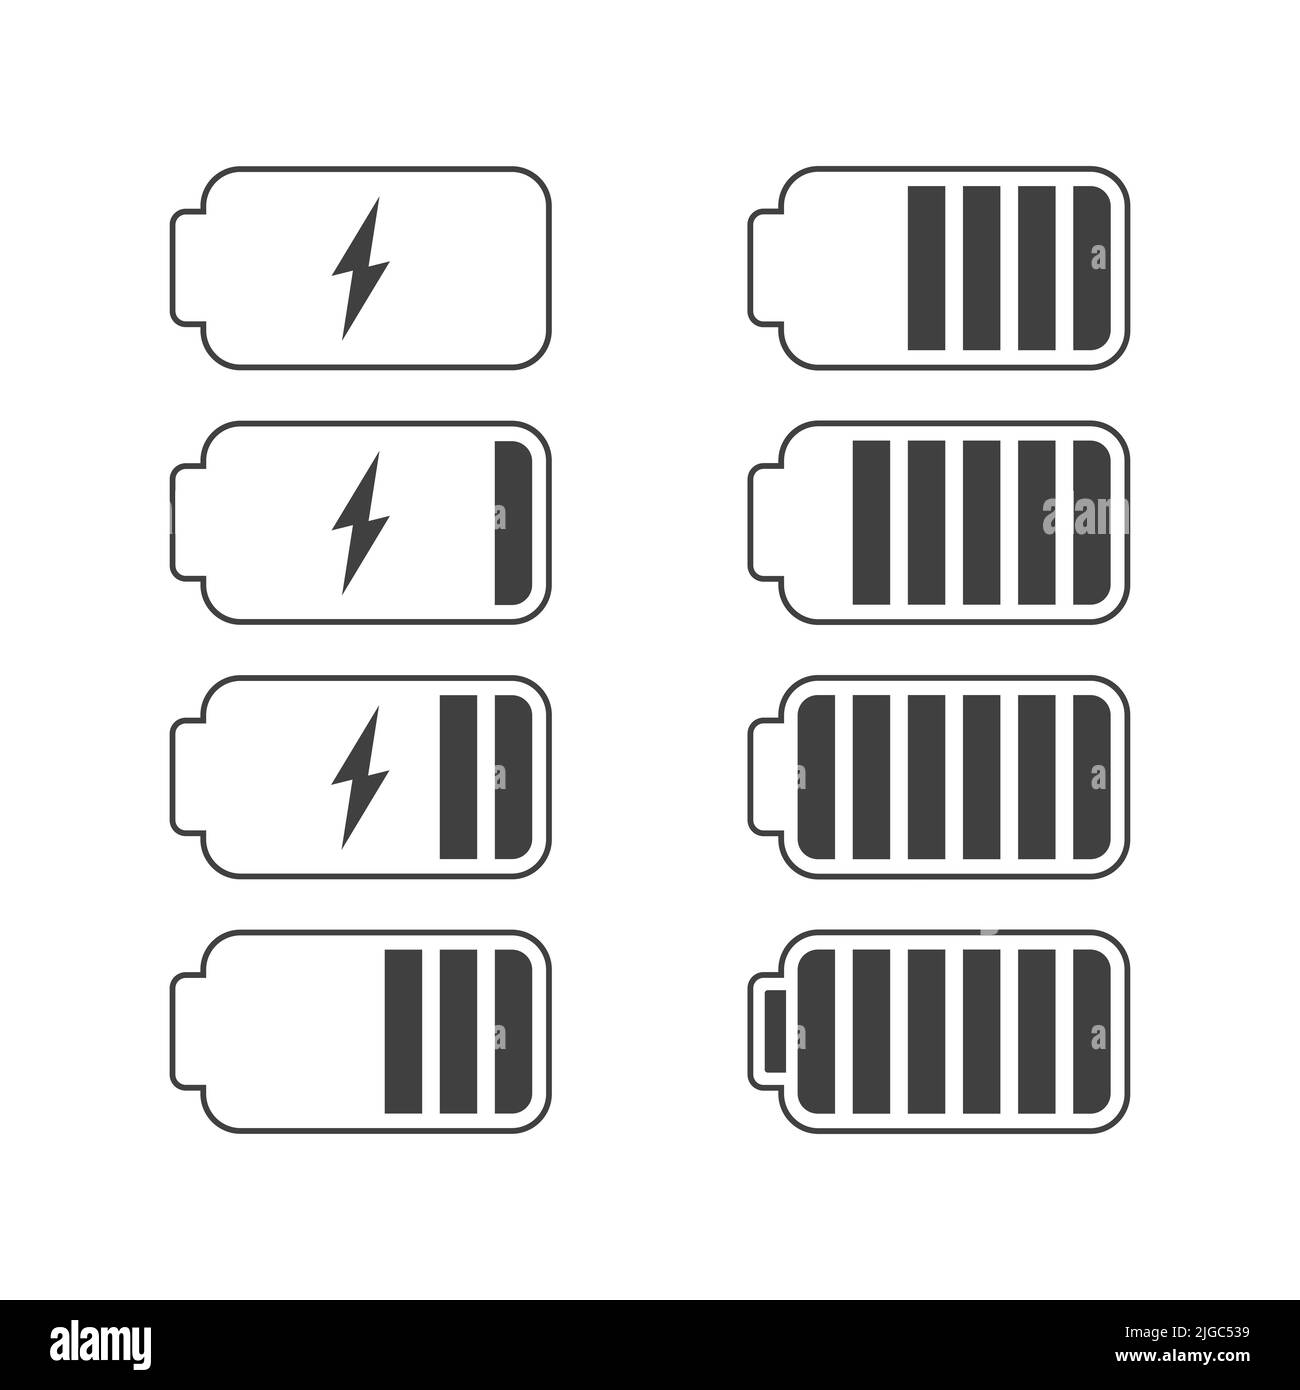 Battery charge icons set of different levels. Line sign Stock Vector